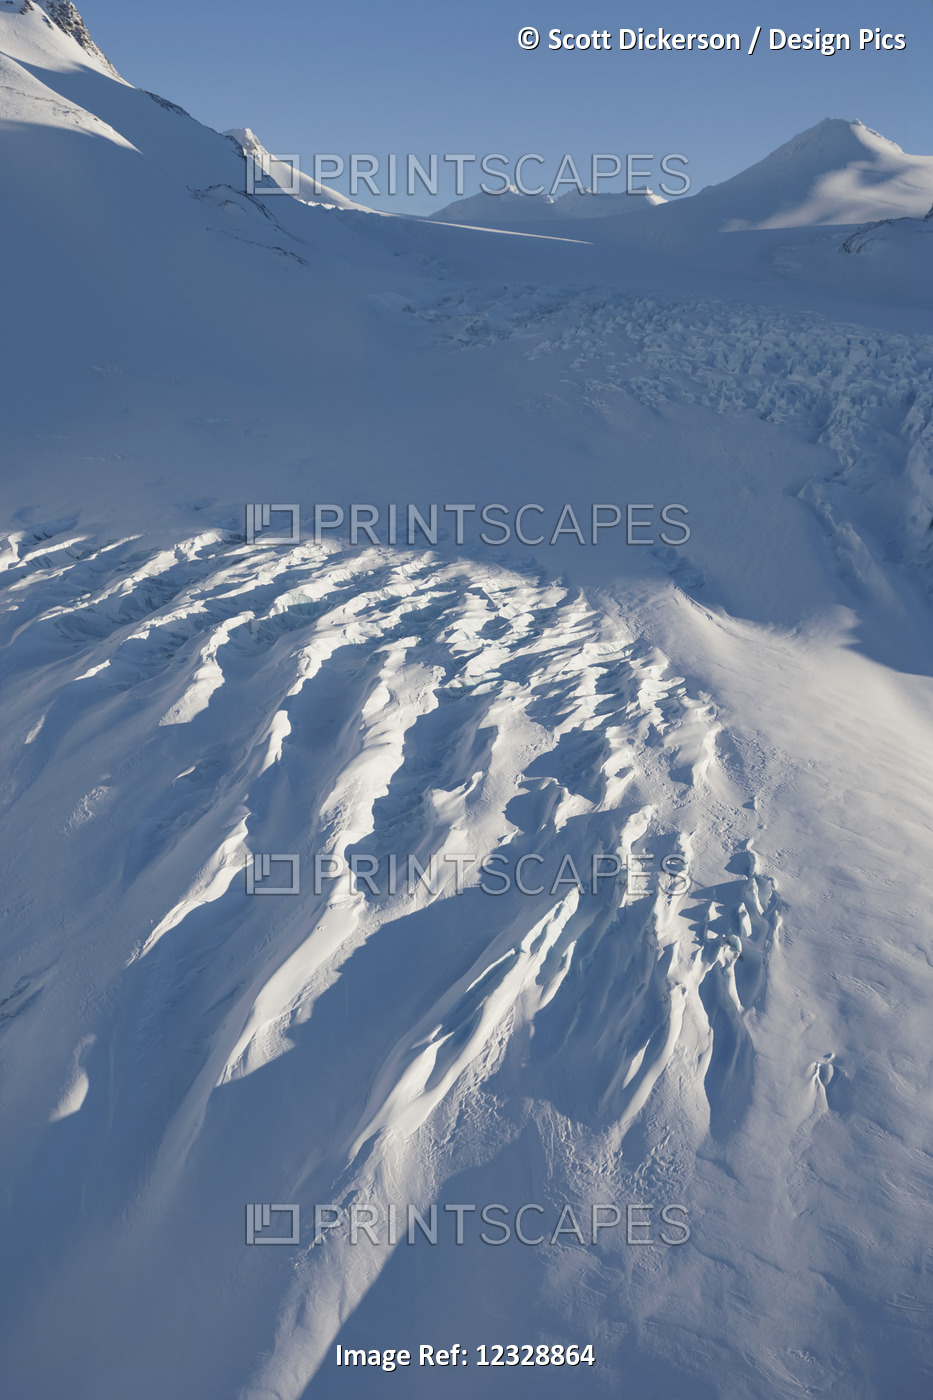 Drifting Patterns In The Surface Of The Snow In The Kenai Mountains; Alaska, ...